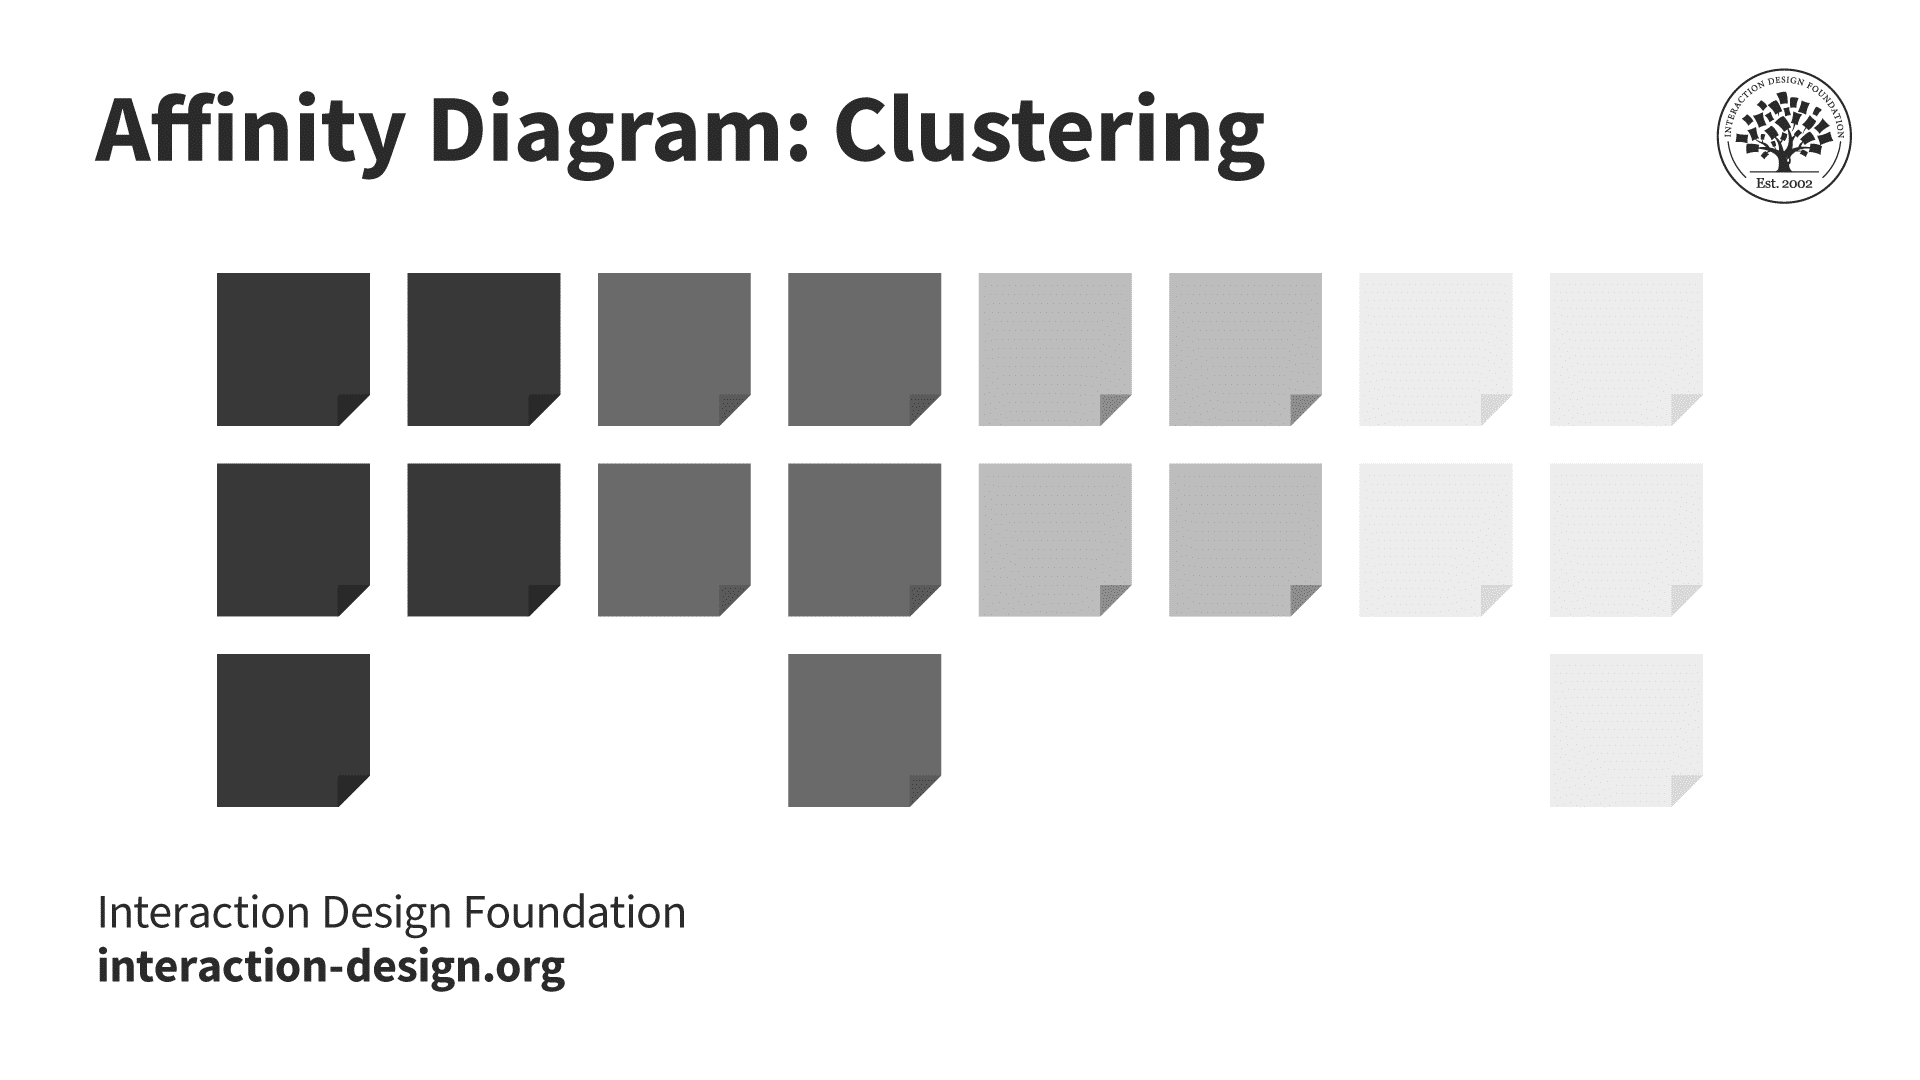 “Affinity Diagram: Clustering.” Several empty post-it notes with the bottom right corner folded over grouped together by color, in this case various shades of gray, going from left to right — dark gray to white.